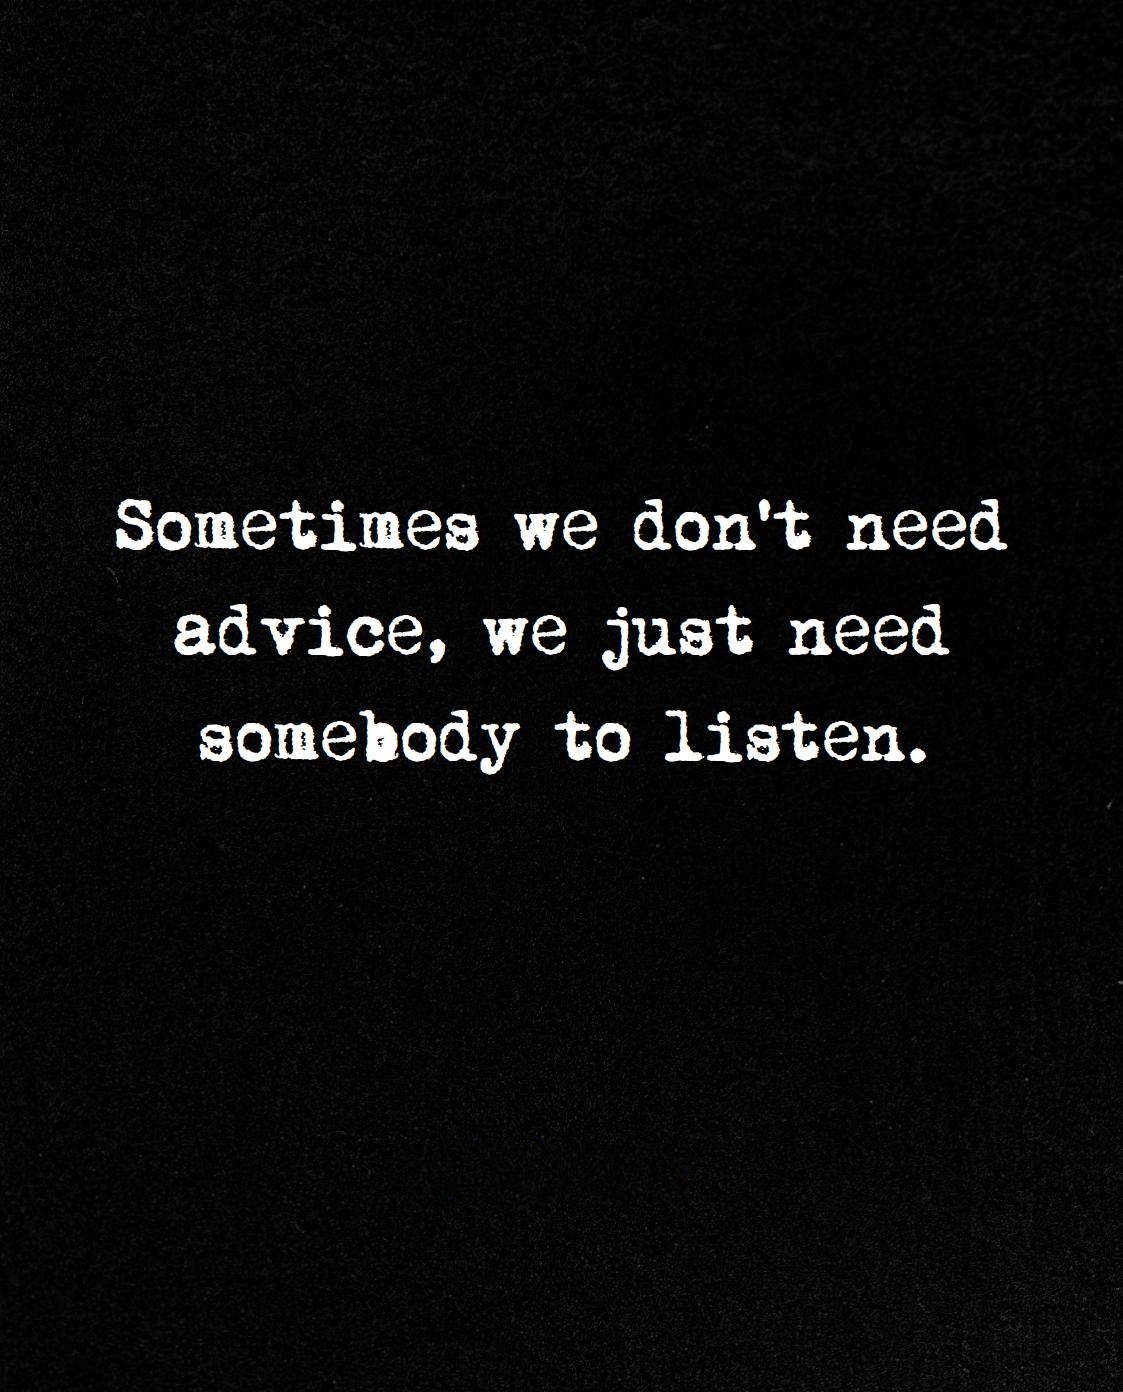 Sometimes we don't need advice, we just need somebody to listen